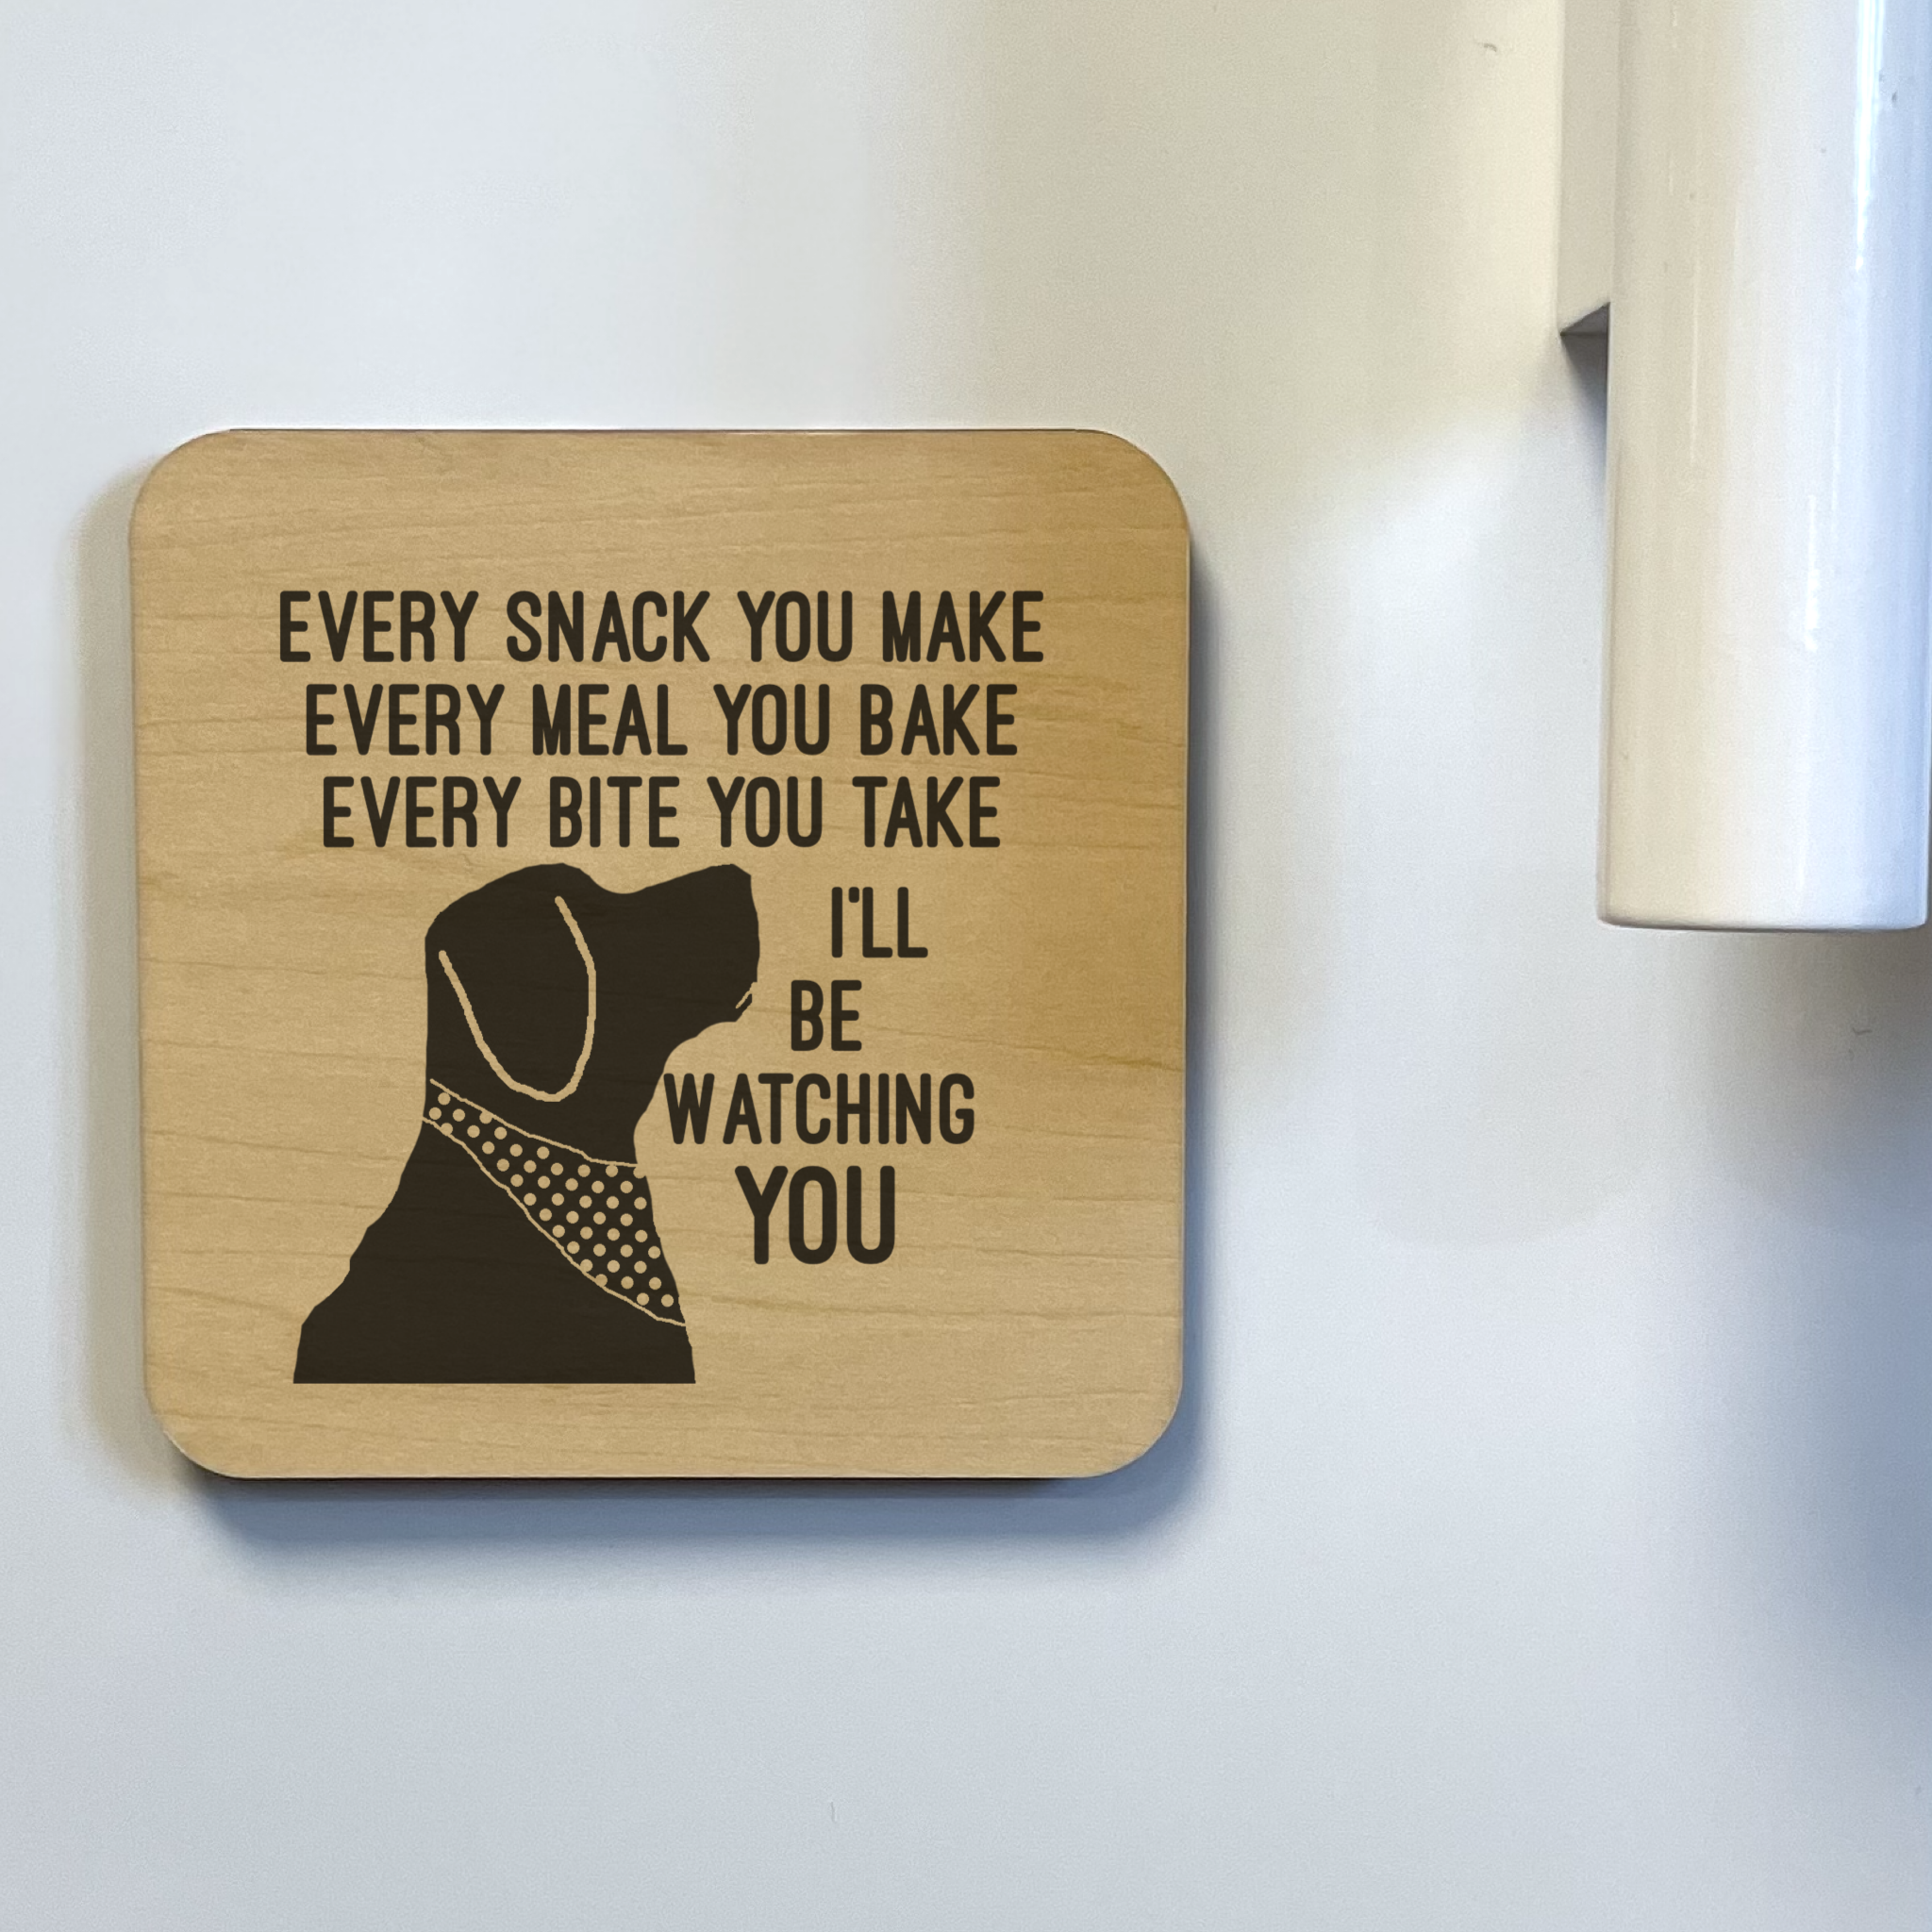 EVERY SNACK YOU MAKE I'LL BE WATCHING DOG DK MAGNET / DRINK COASTER